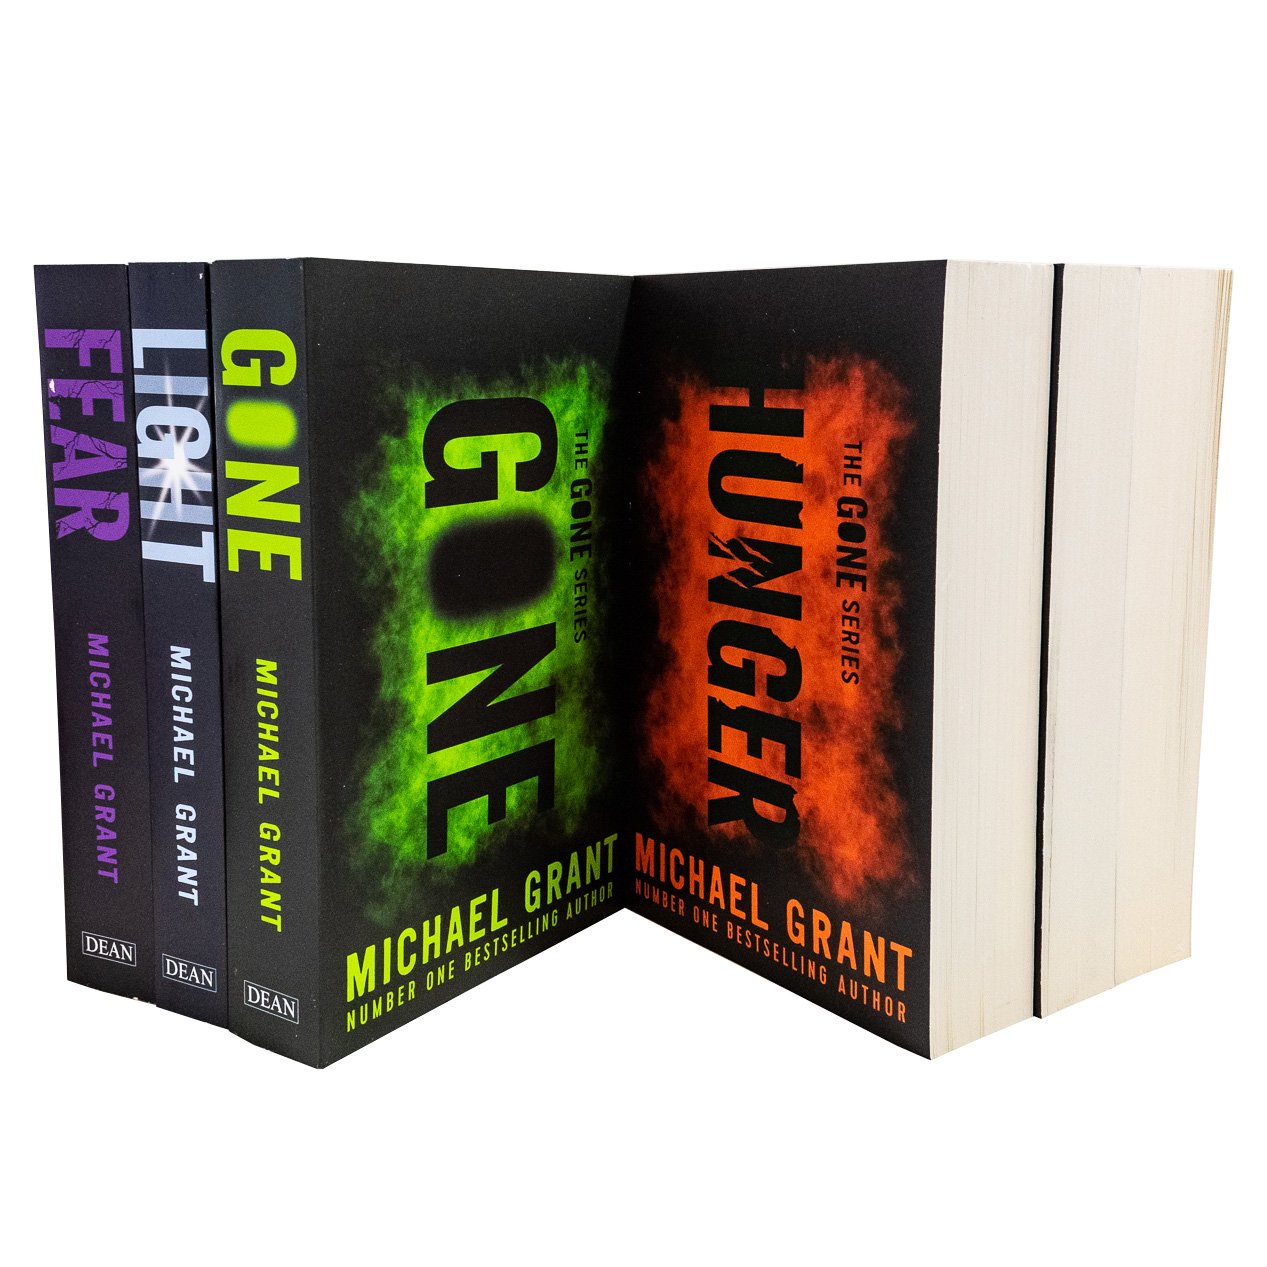 Gone Series 6 Books Young Adult Collection Paperback New Cover Set By Michael Grant - St Stephens Books